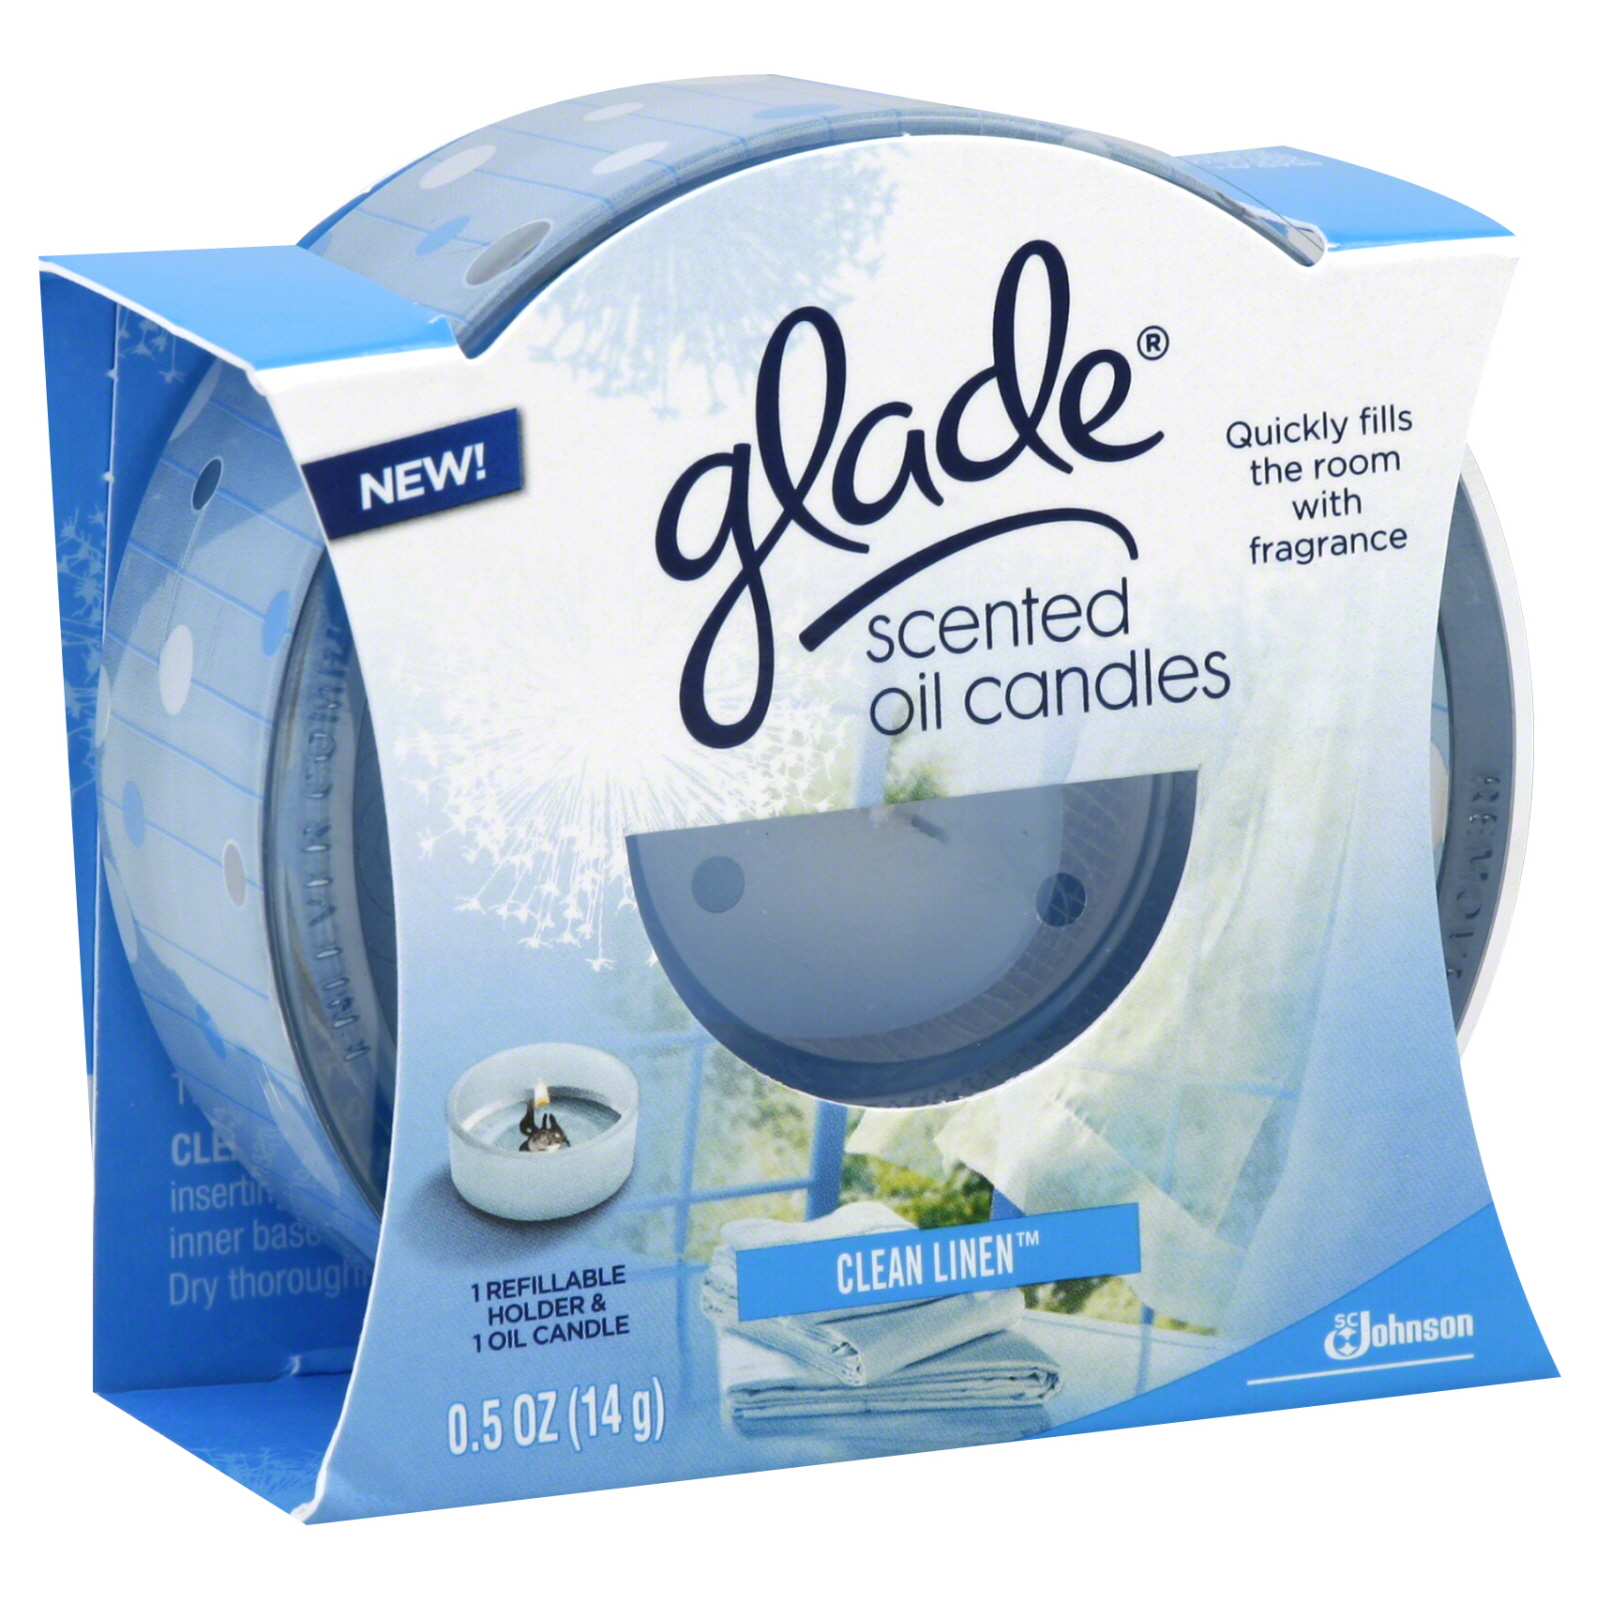 Glade Scented Oil Candle, Clean Linen, 1 candle [0.5 oz (14 g)]